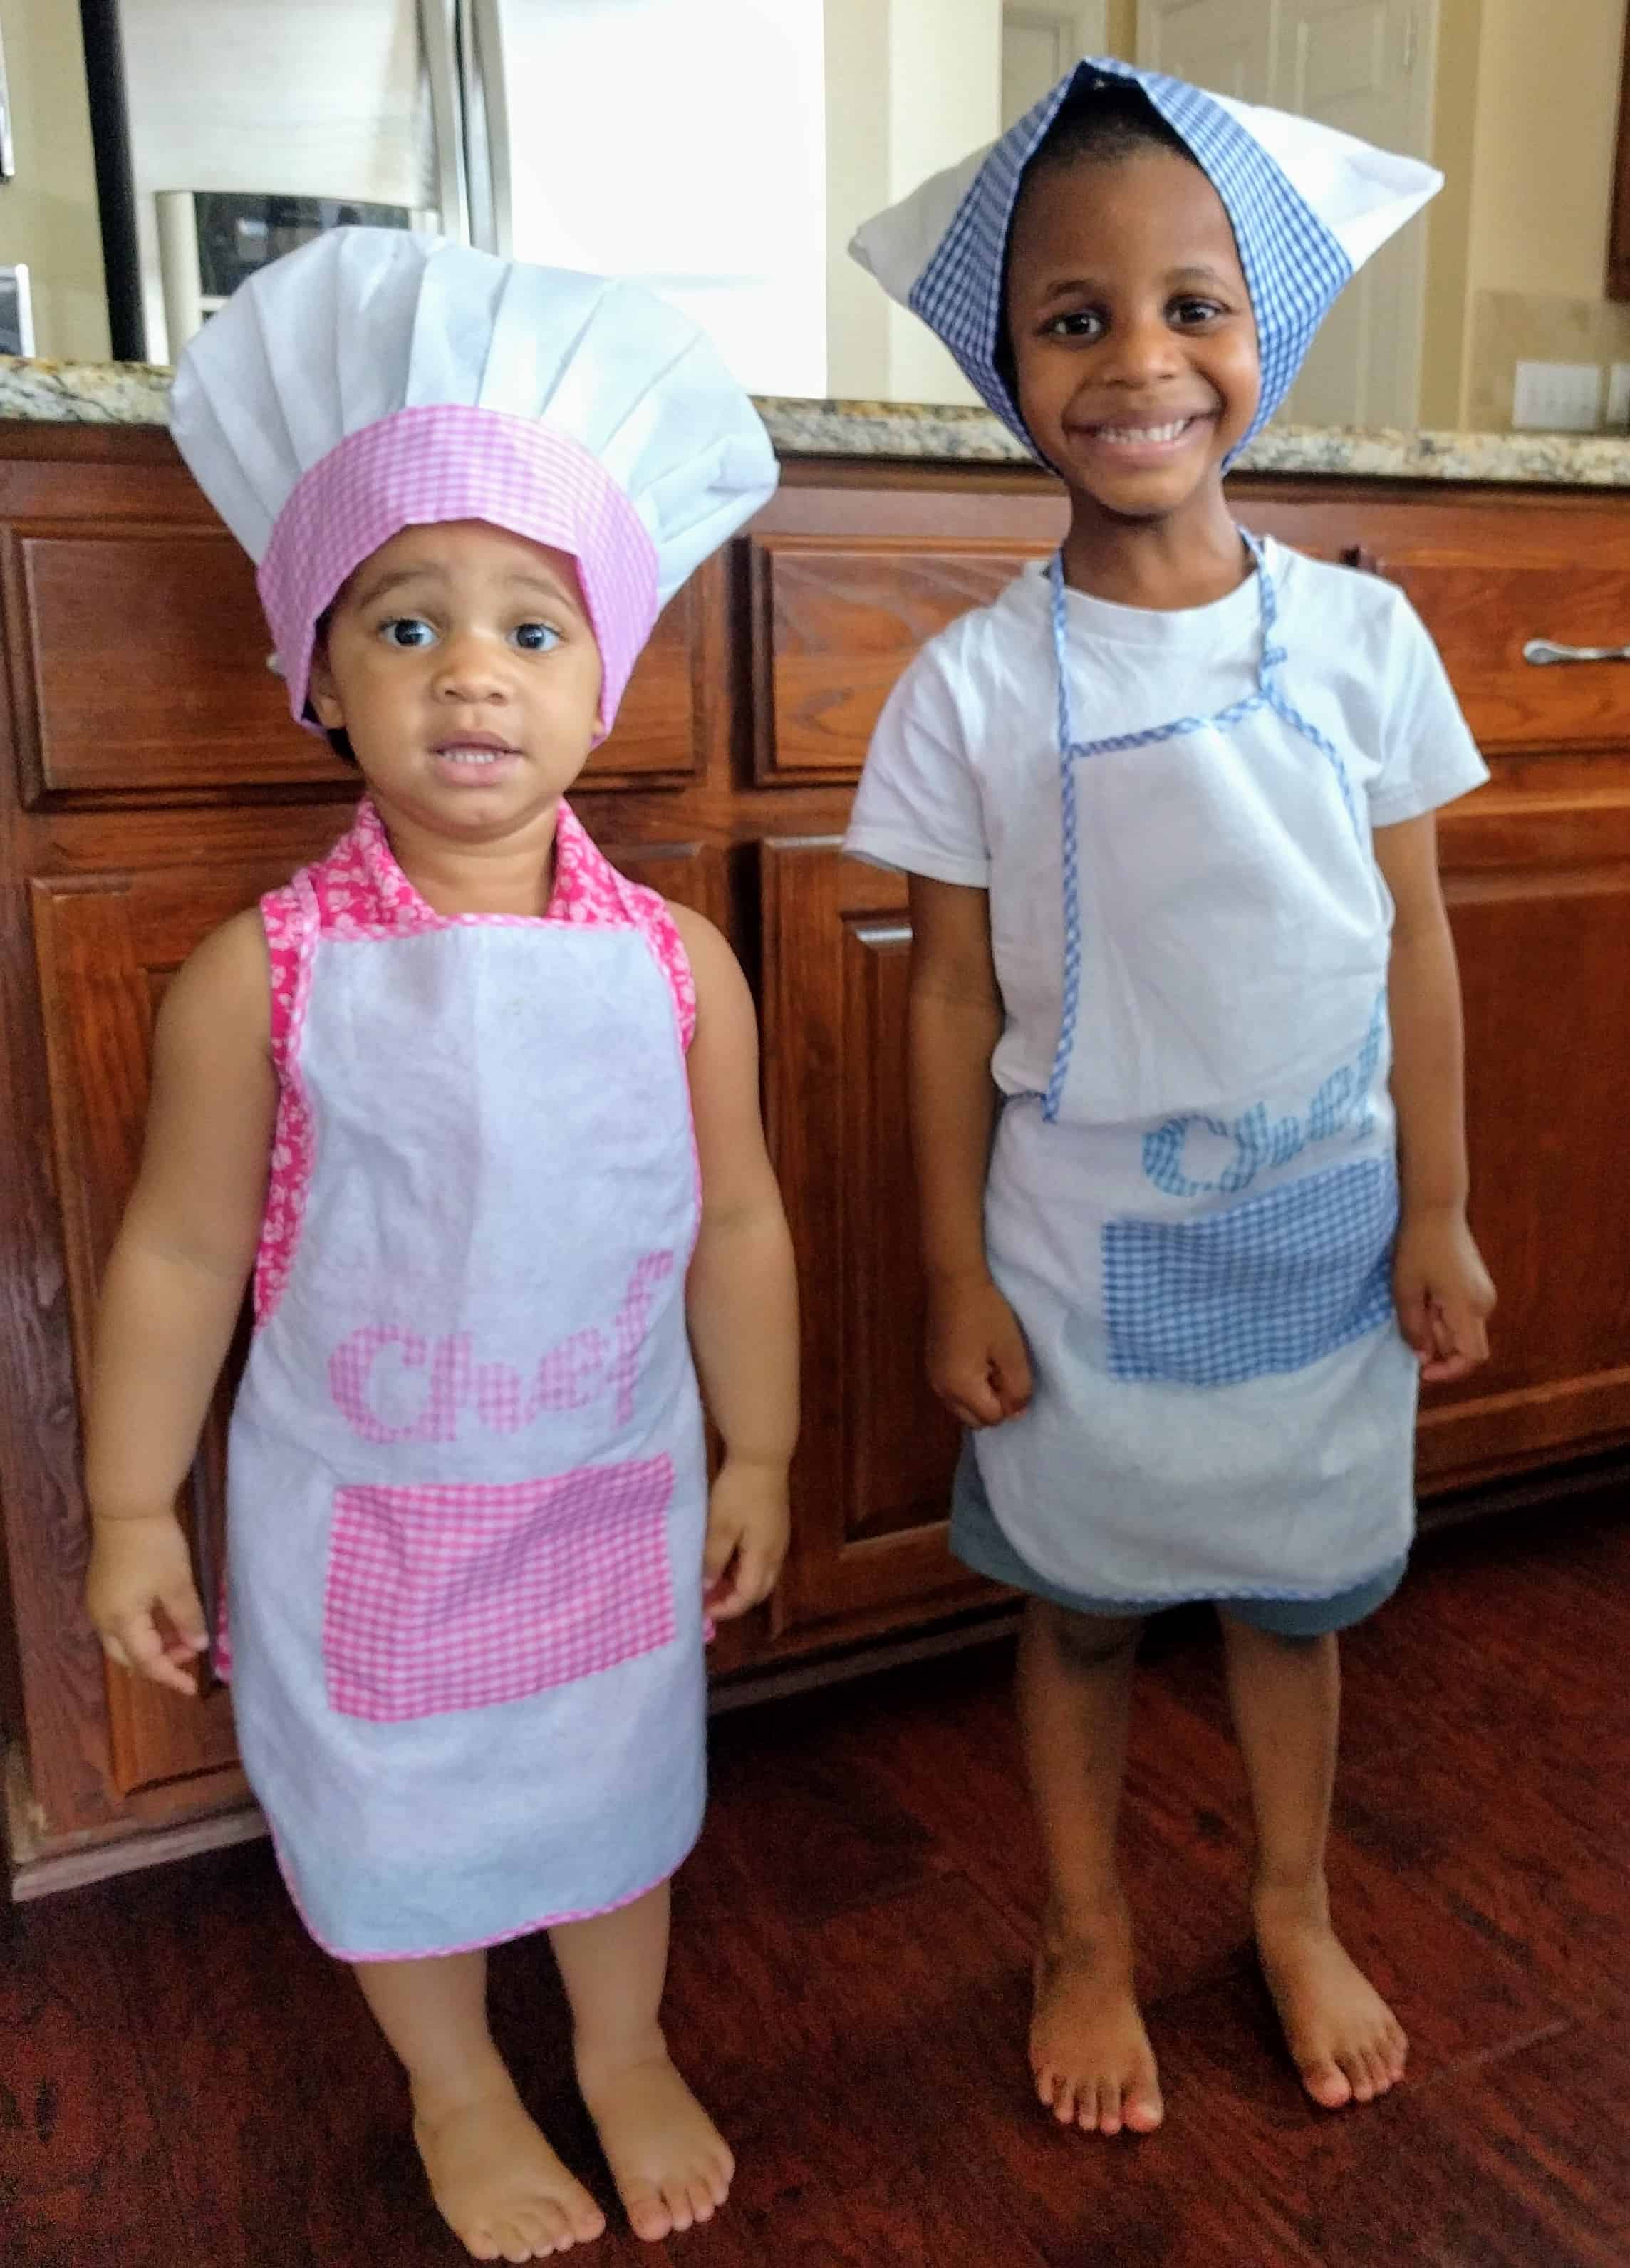 Cooking with the kids